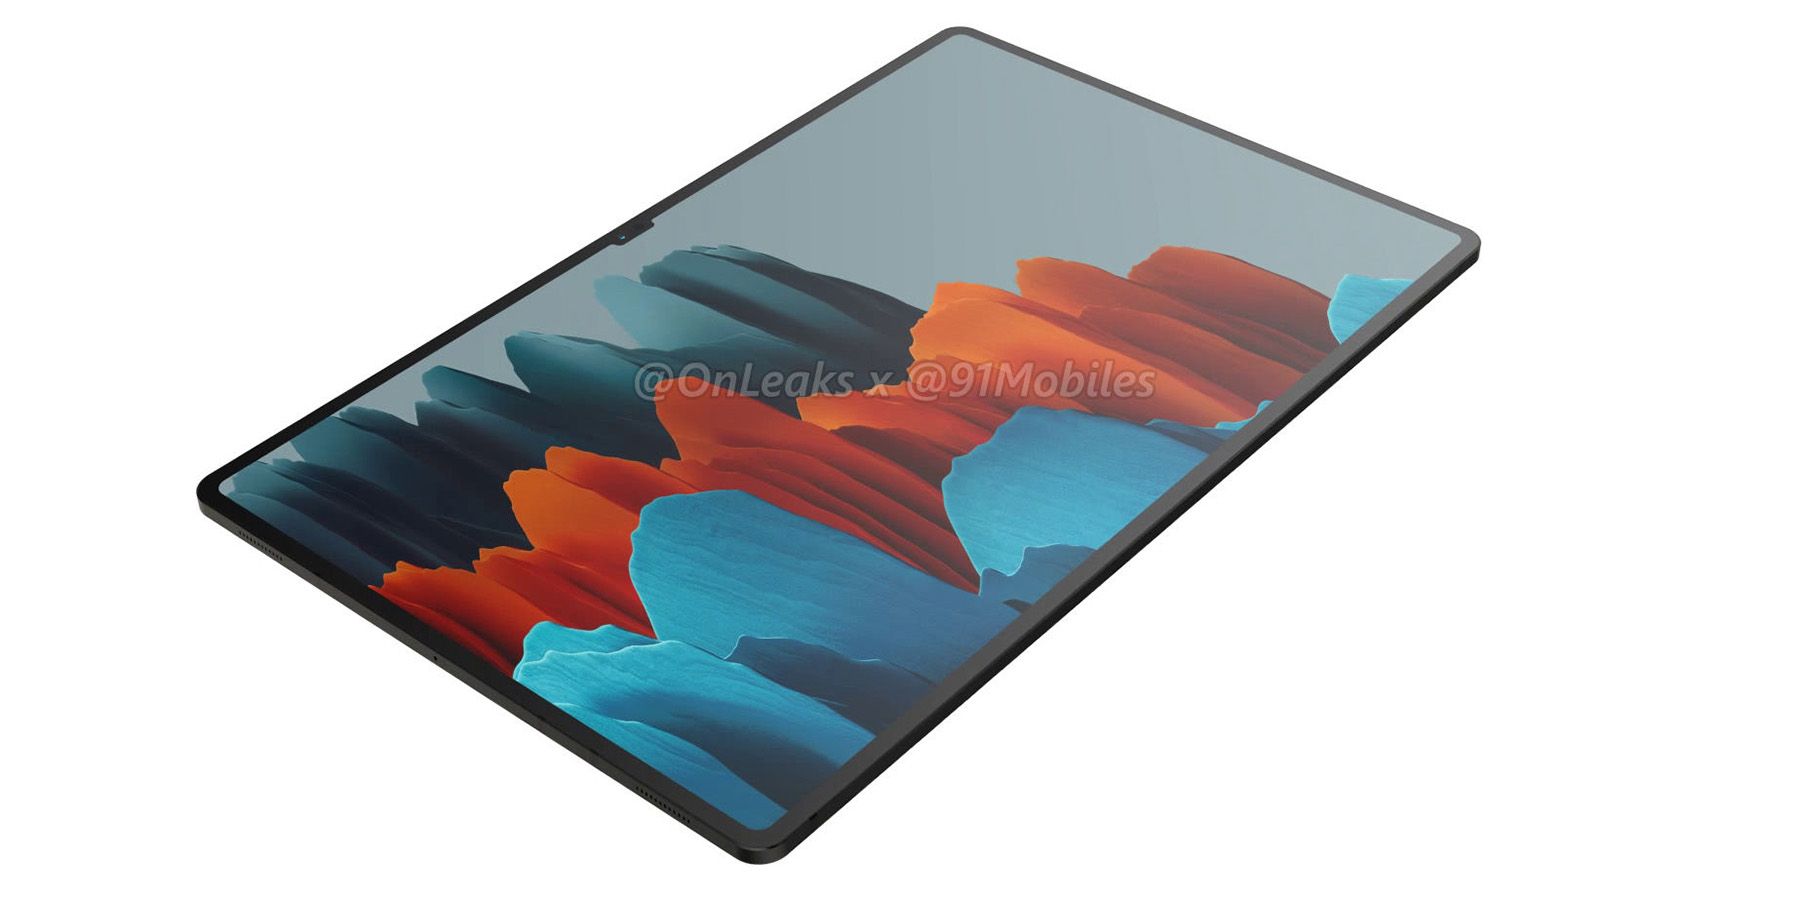 The Samsung Galaxy Tab S8 Ultra Is Filtered: Giant And With Notch - Bullfrag